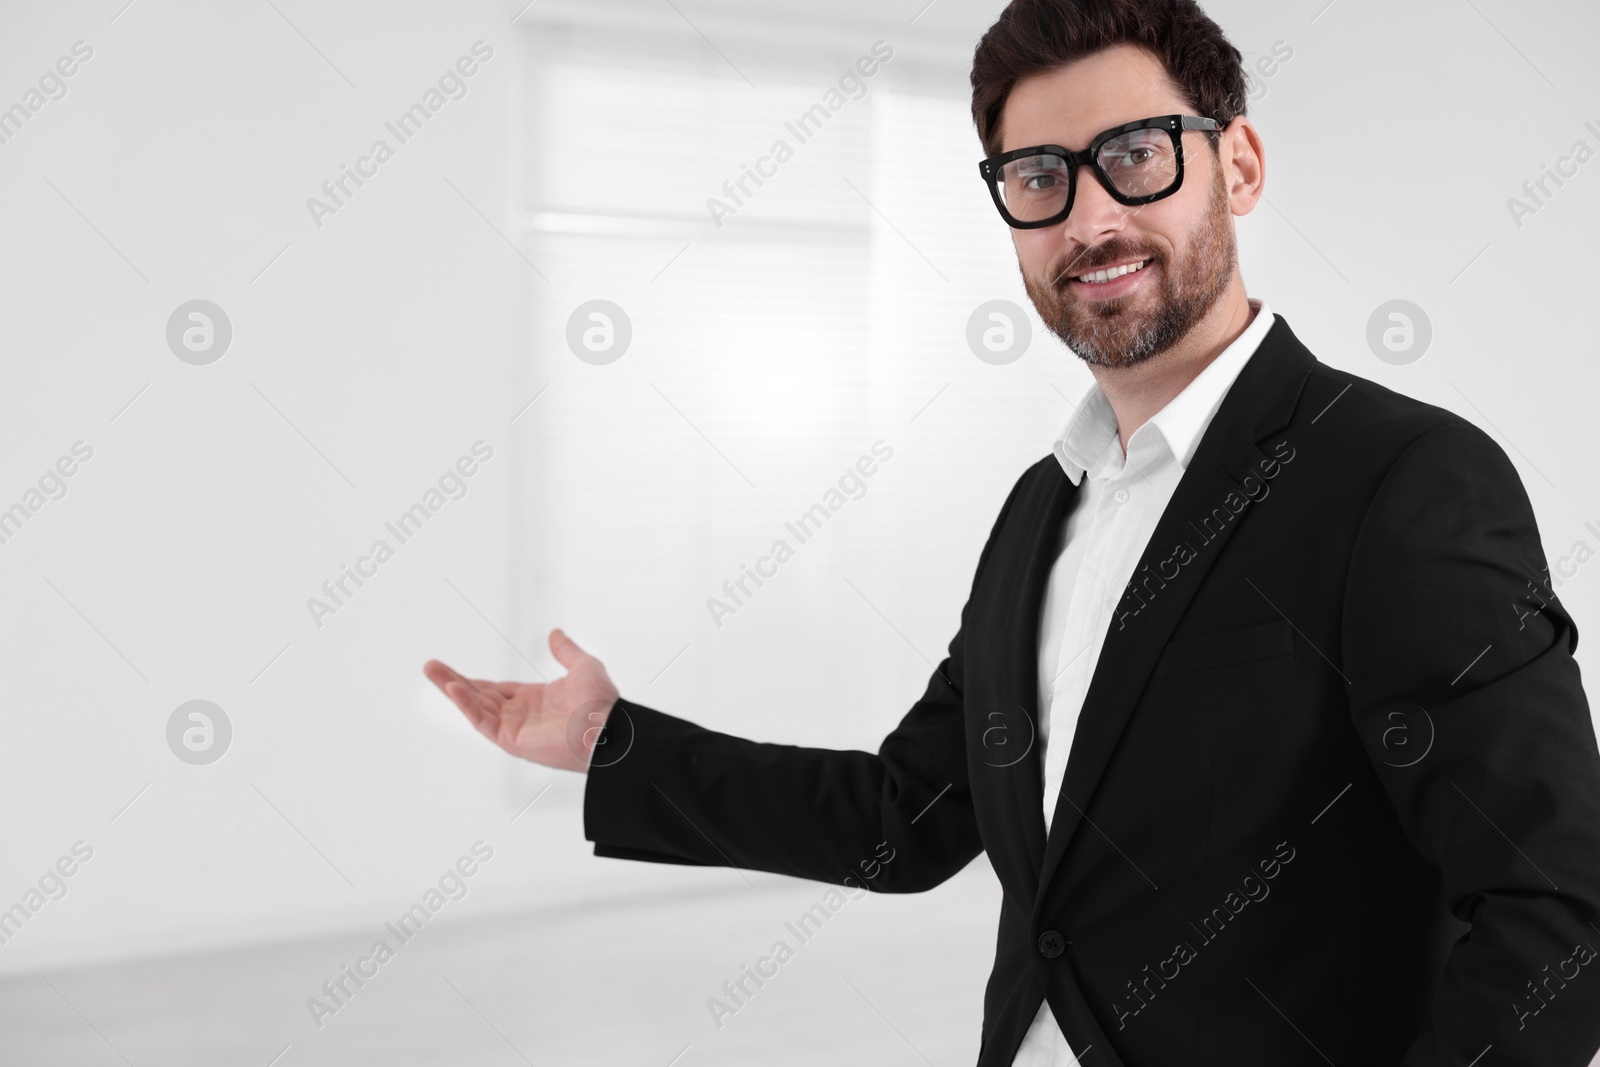 Photo of Happy real estate agent showing new house. Space for text